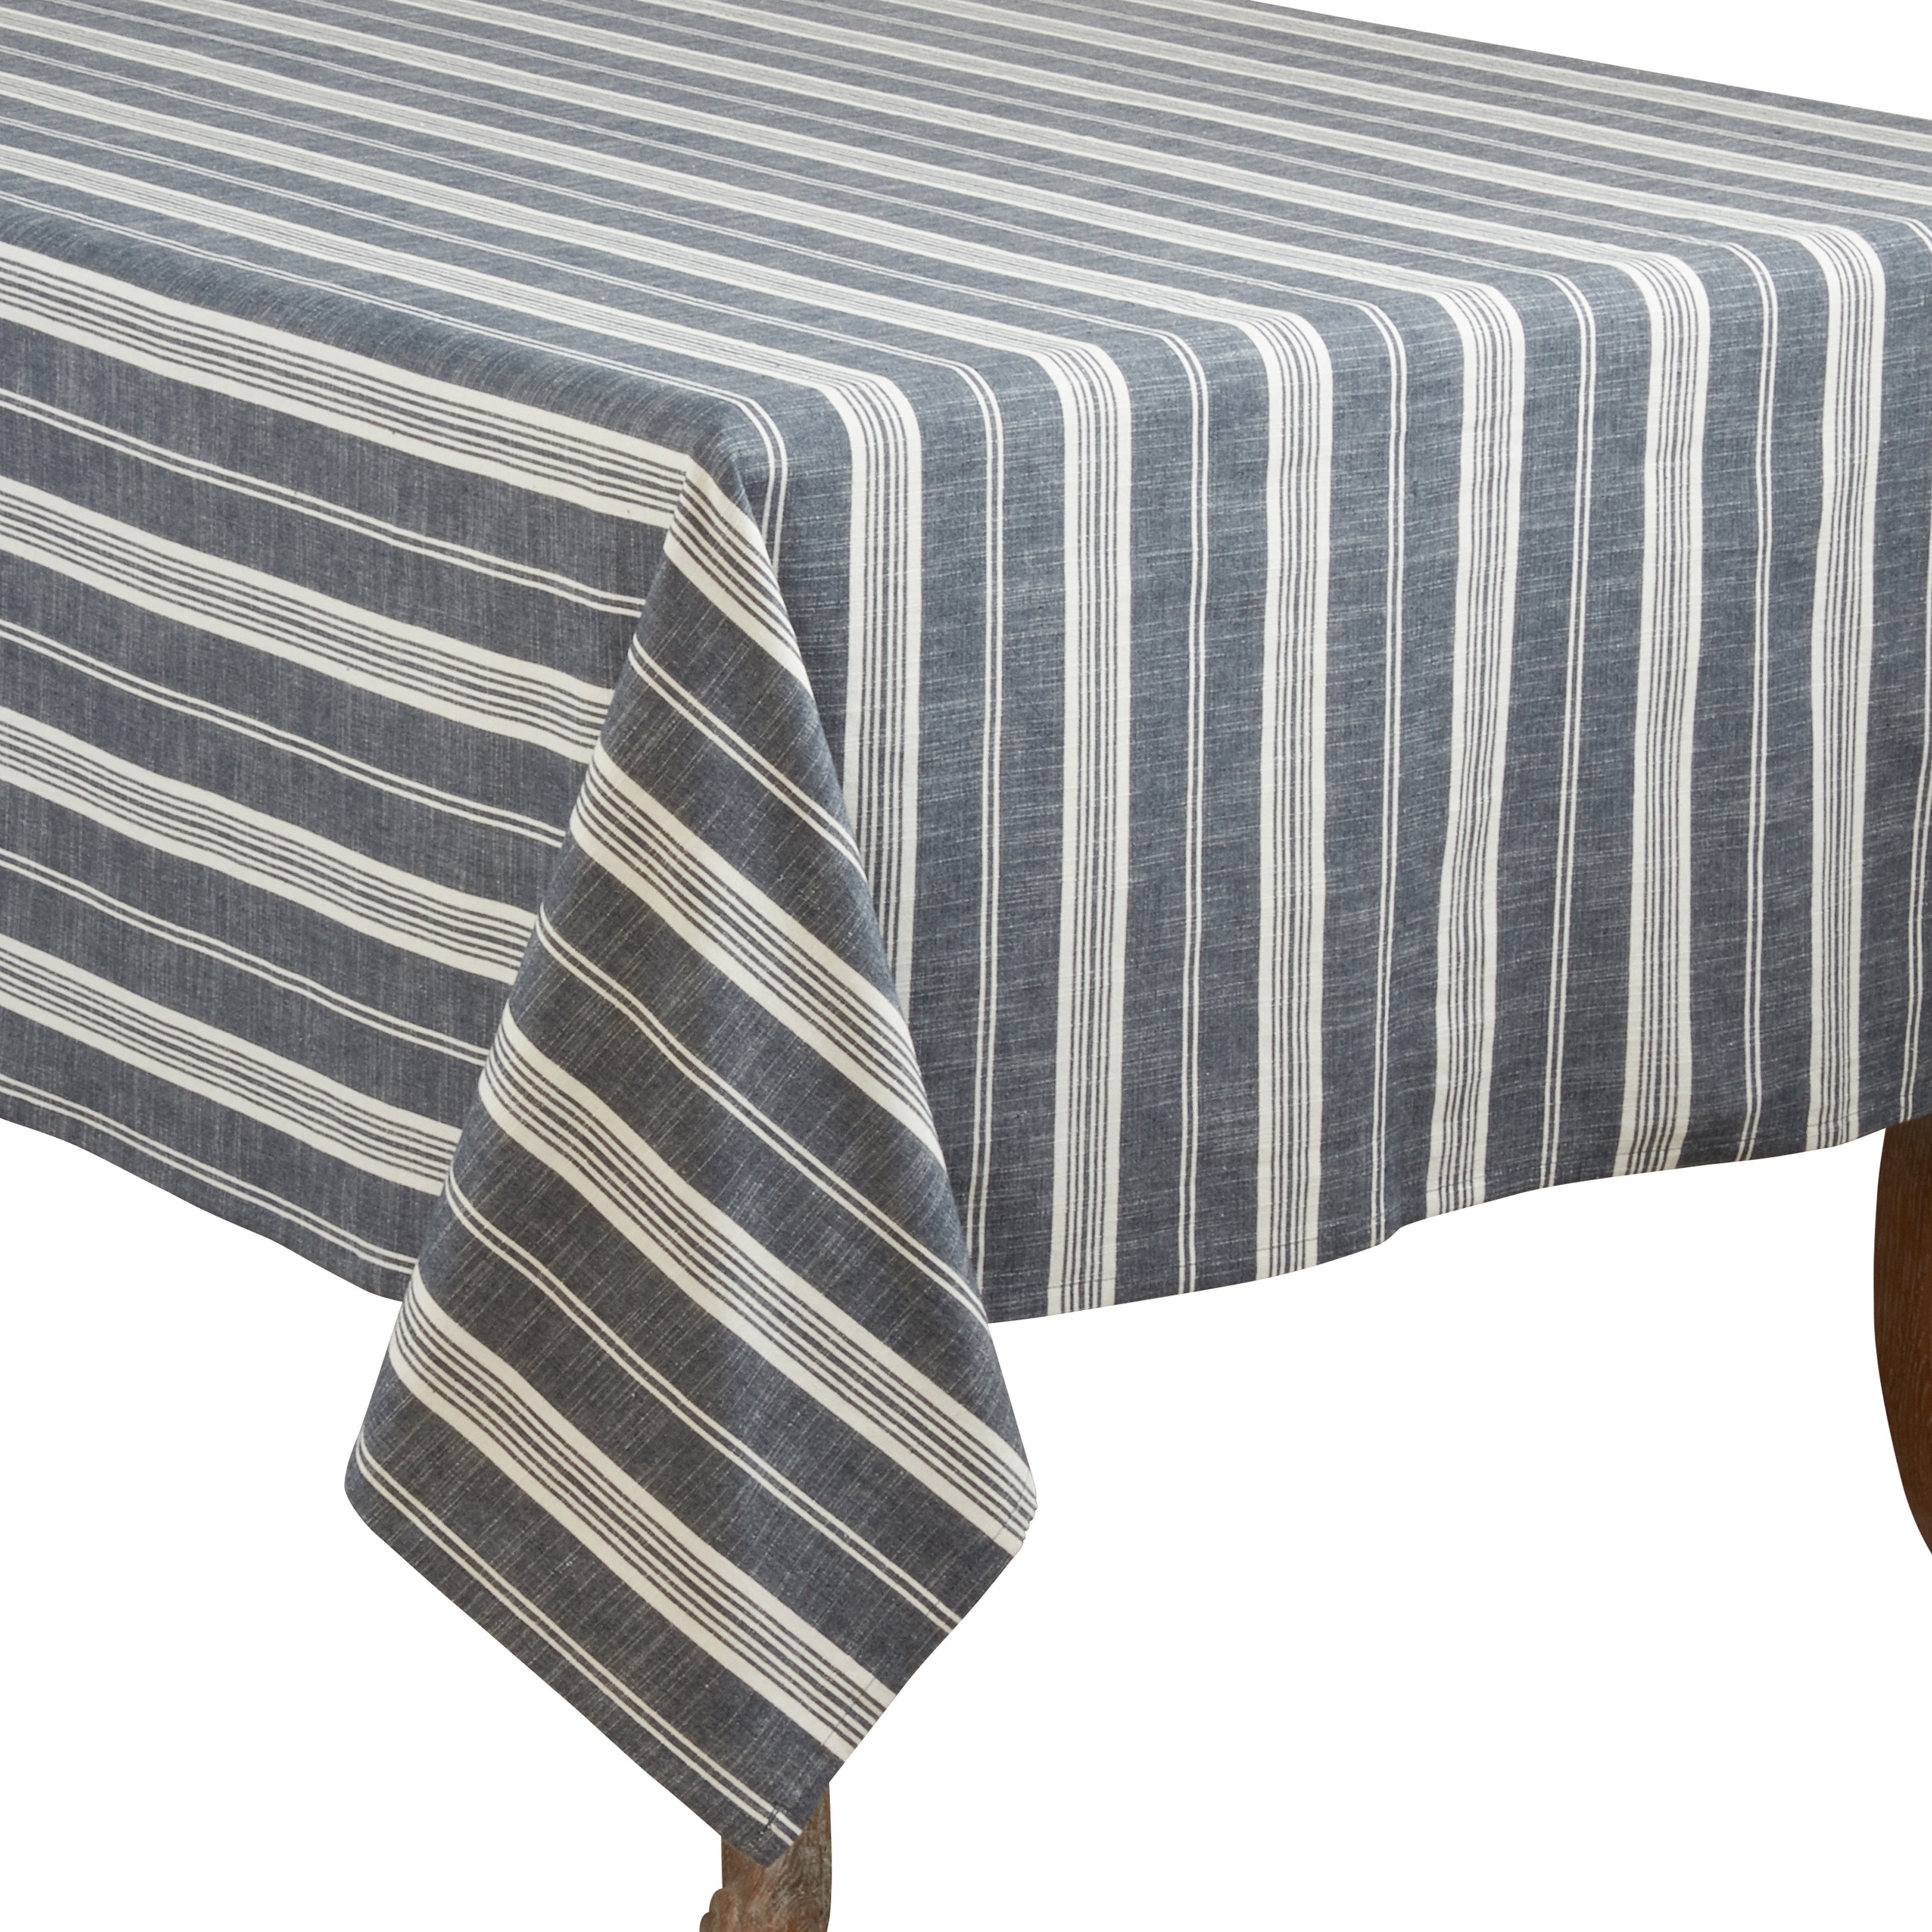 Cotton Tablecloth with Striped Design